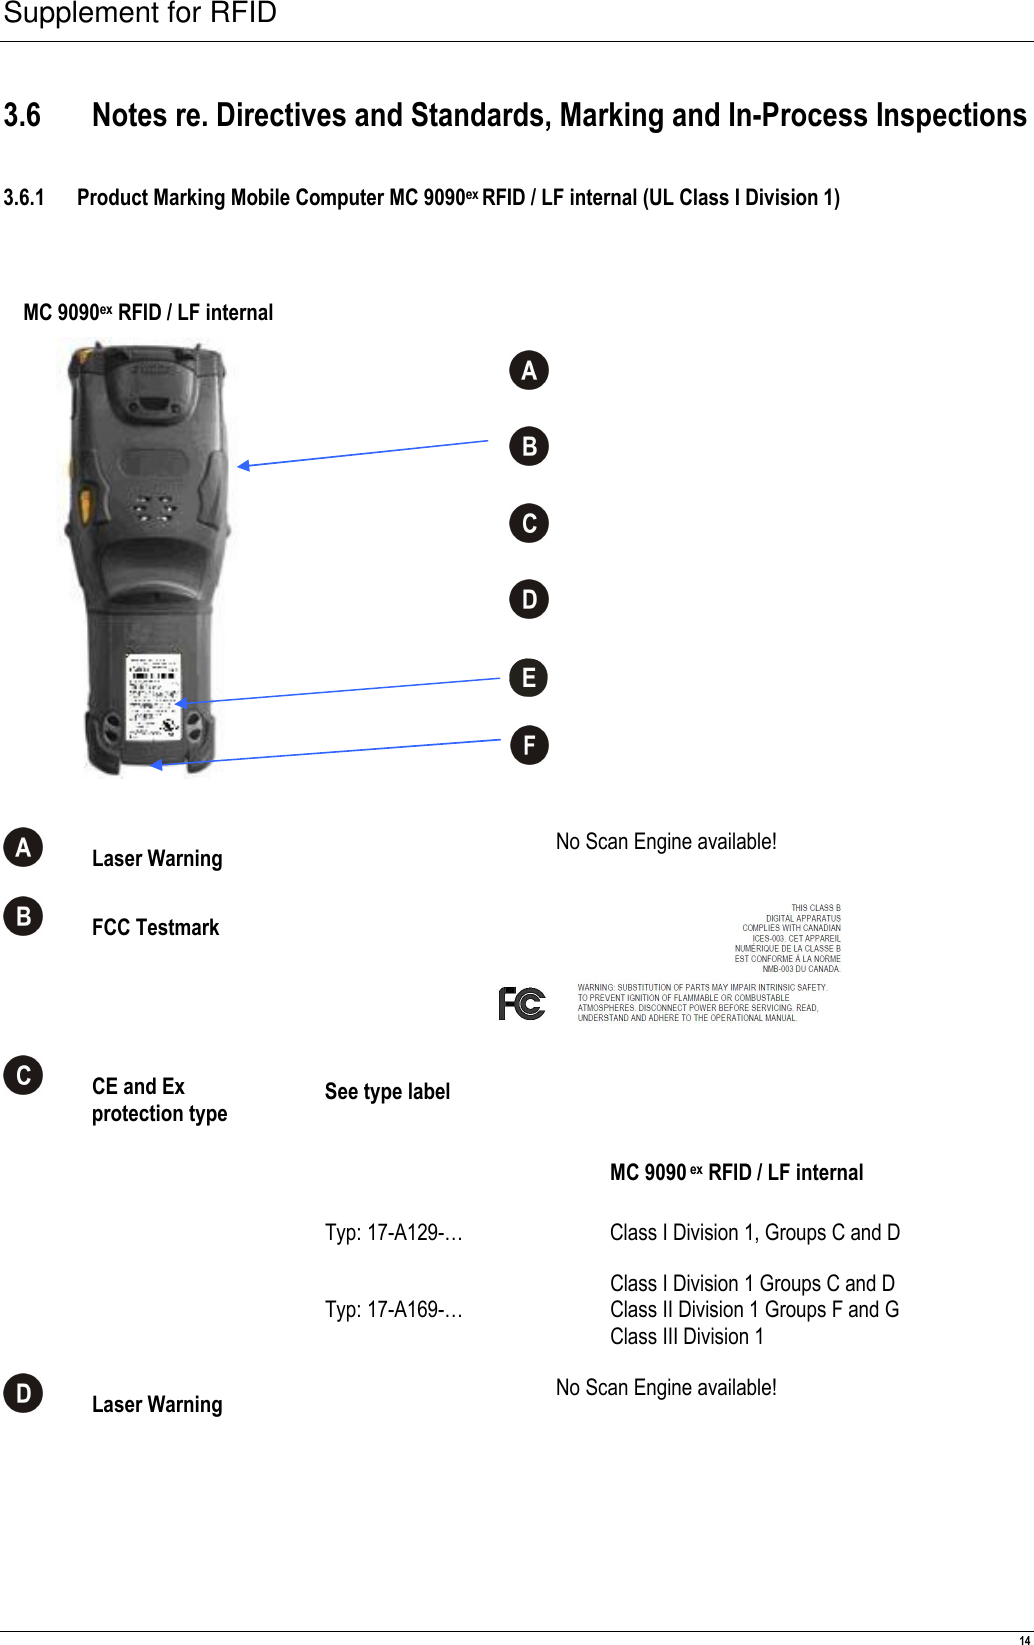 Supplement for RFID  14 3.6.1 Product Marking Mobile Computer MC 9090ex RFID / LF internal (UL Class I Division 1)  MC 9090ex RFID / LF internal       E      Laser Warning  No Scan Engine available!   FCC Testmark    CE and Ex   protection type See type label   MC 9090 ex RFID / LF internal  Typ: 17-A129-…  Class I Division 1, Groups C and D  Typ: 17-A169-… Class I Division 1 Groups C and D Class II Division 1 Groups F and G Class III Division 1  Laser Warning   No Scan Engine available! 3.6 Notes re. Directives and Standards, Marking and In-Process Inspections  